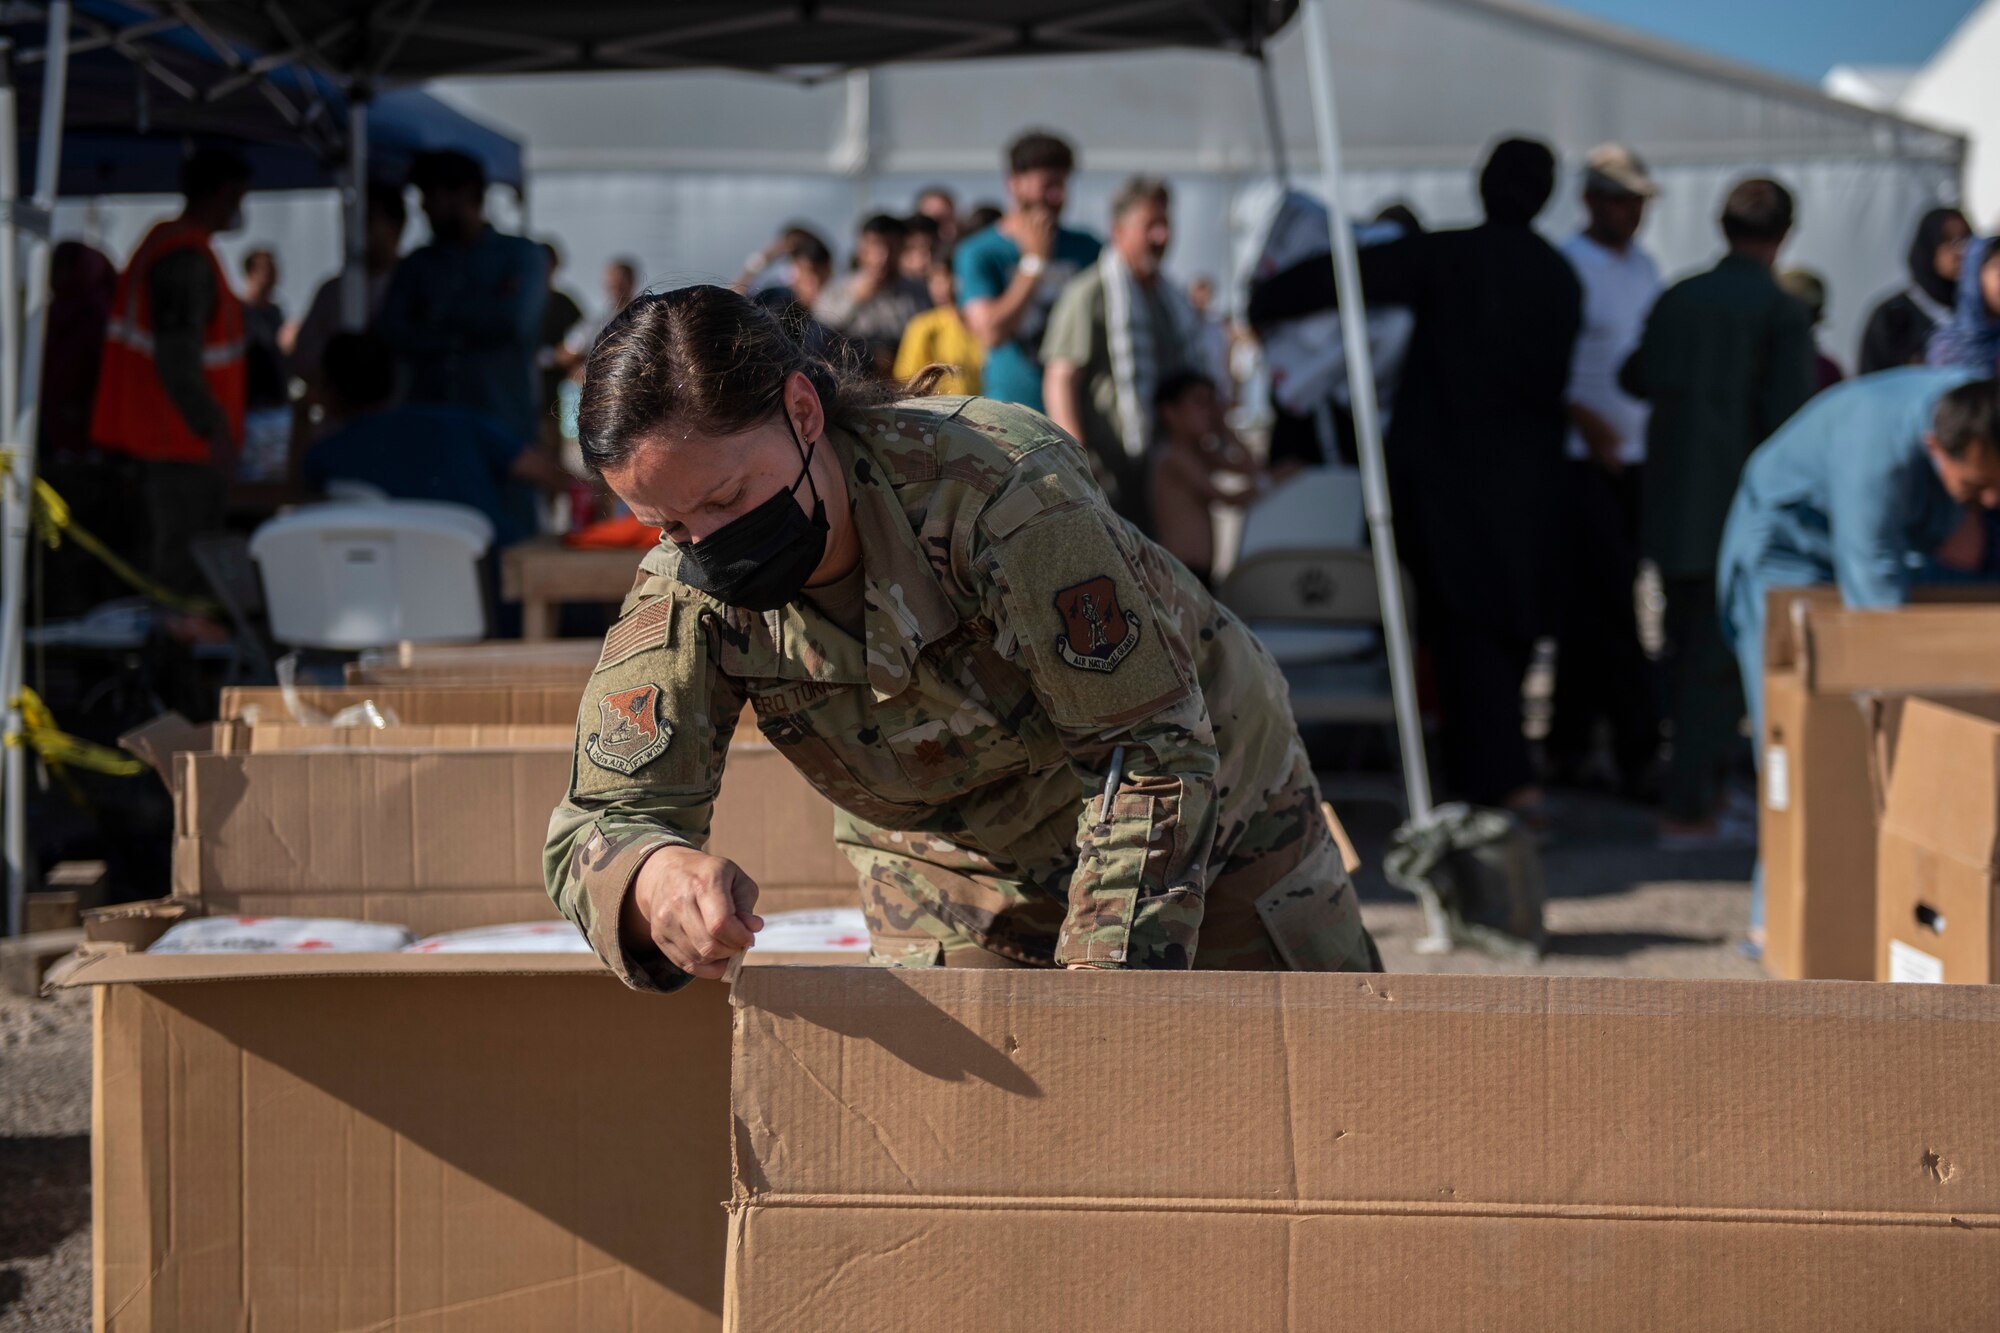 An Airman assigned to Task Force-Holloman helps distribute blankets from the American Red Cross to Afghan refugees at Aman Omid Village at Holloman Air Force Base, New Mexico, Sept. 6, 2021. The Department of Defense, through U.S. Northern Command, and in support of the Department of State and Department of Homeland Security, is providing transportation, temporary housing, medical screening, and general support for at least 50,000 Afghan evacuees at suitable facilities, in permanent or temporary structures, as quickly as possible. This initiative provides Afghan evacuees essential support at secure locations outside Afghanistan. (U.S. Air Force photo by Staff Sgt. Kenneth Boyton)